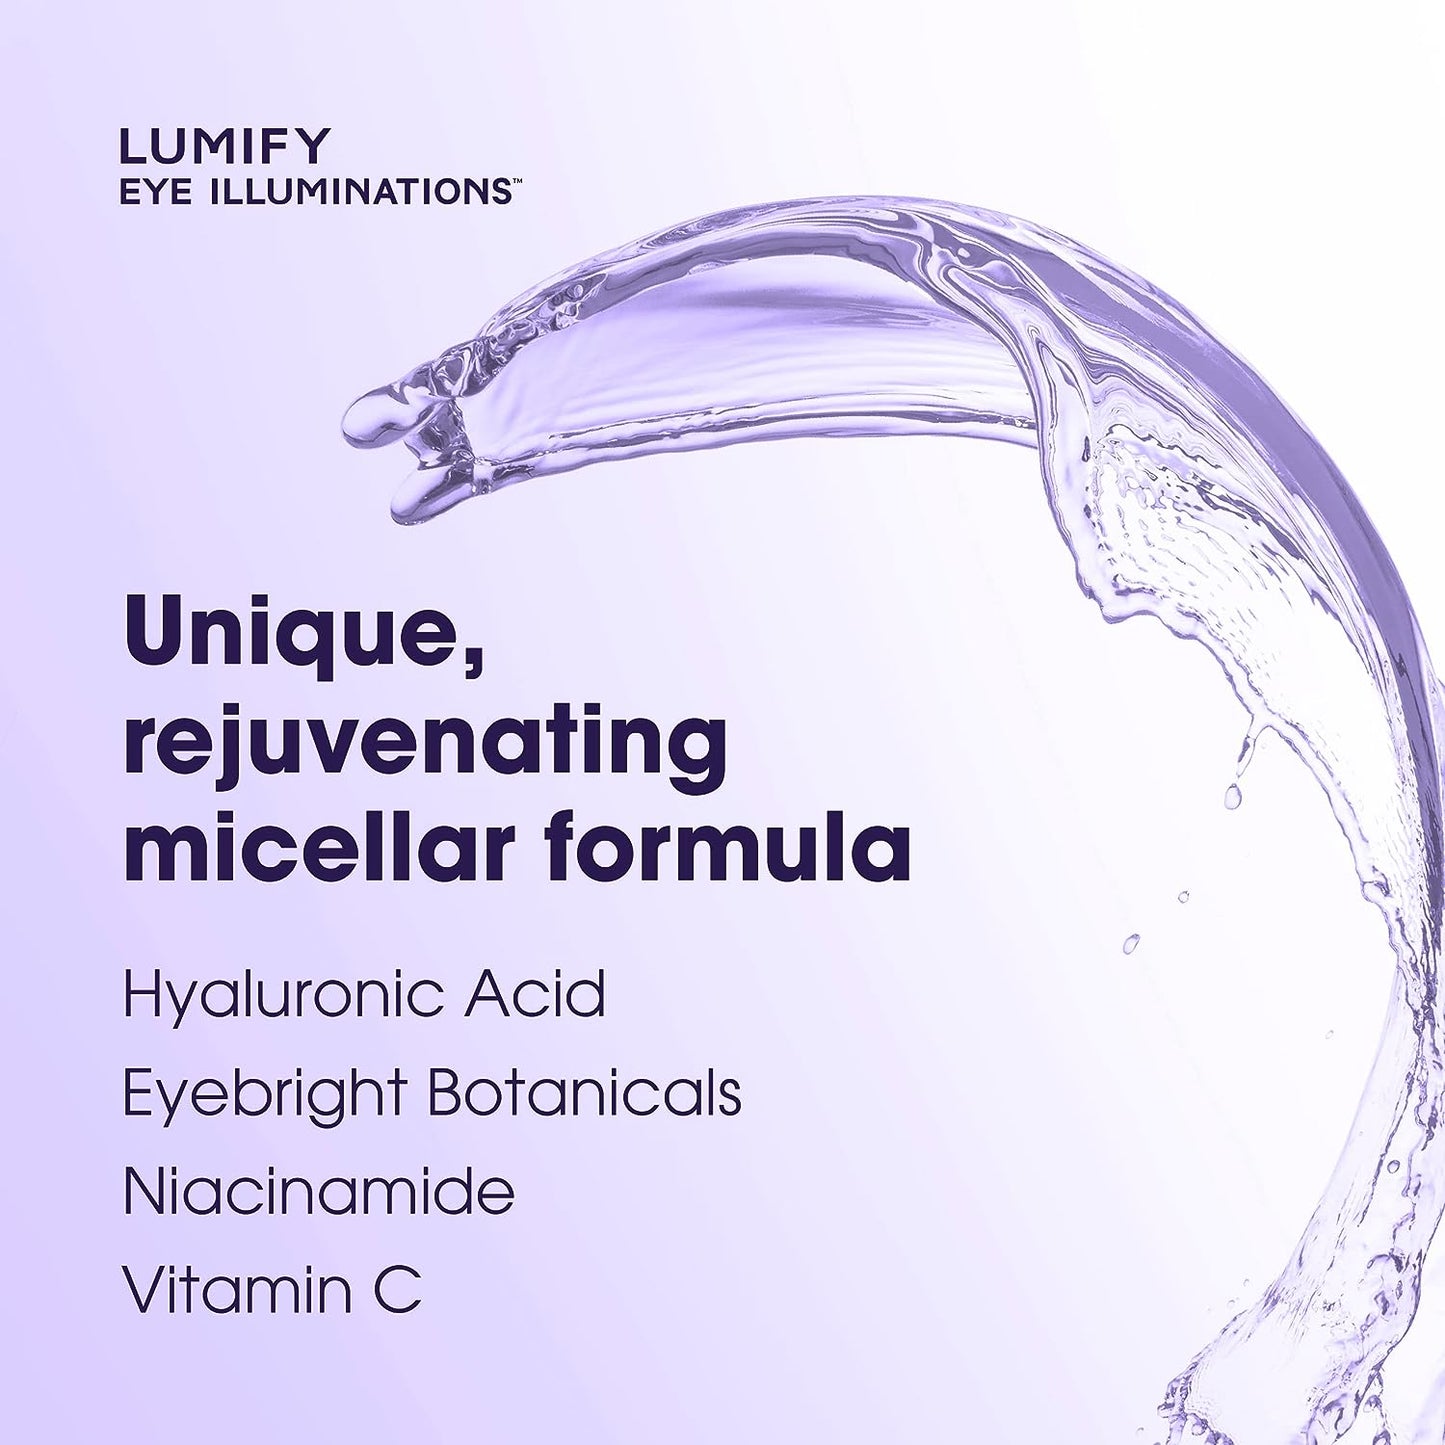 LUMIFY Eye Illuminations Cleansing Water & Eye Makeup Remove 3-in-1 Micellar Water 160mL